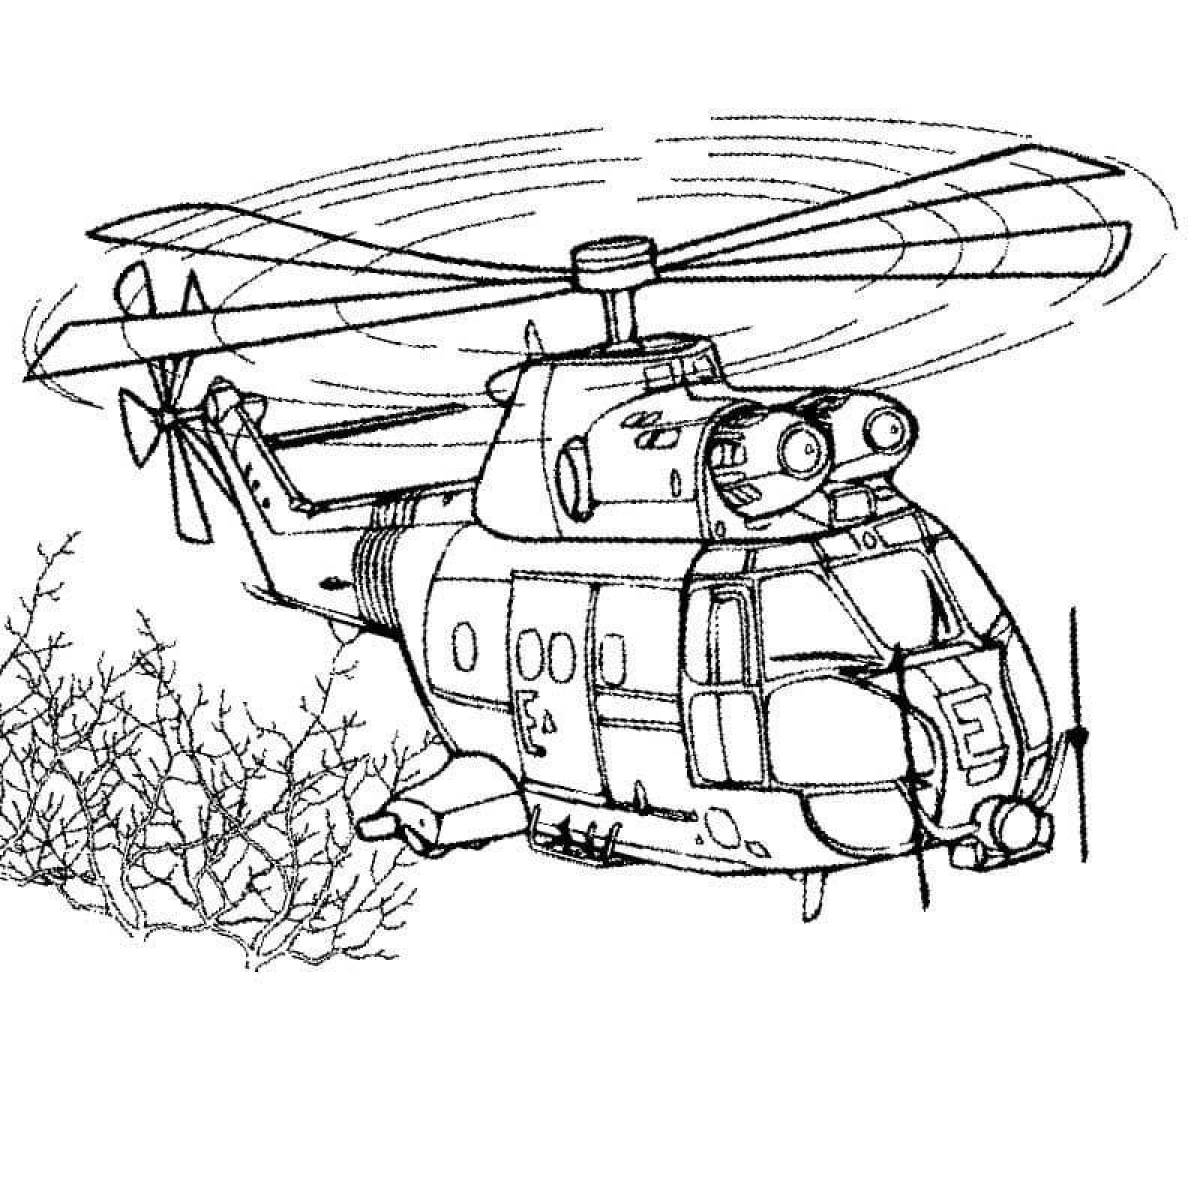 Adorable military helicopter coloring page